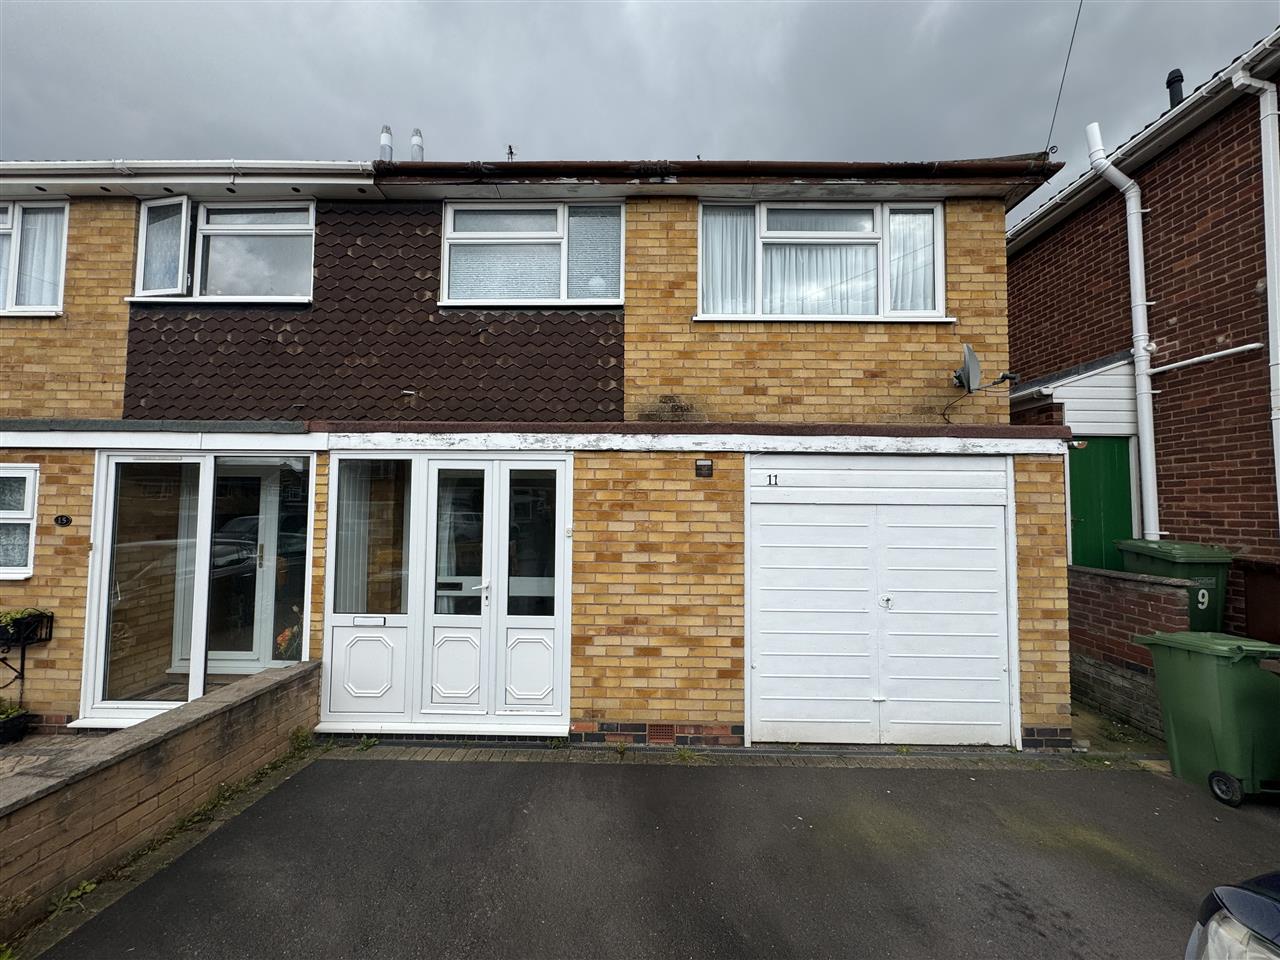 3 bed Semi-Detached House for rent in Solihull. From Partridge Homes - Yardley